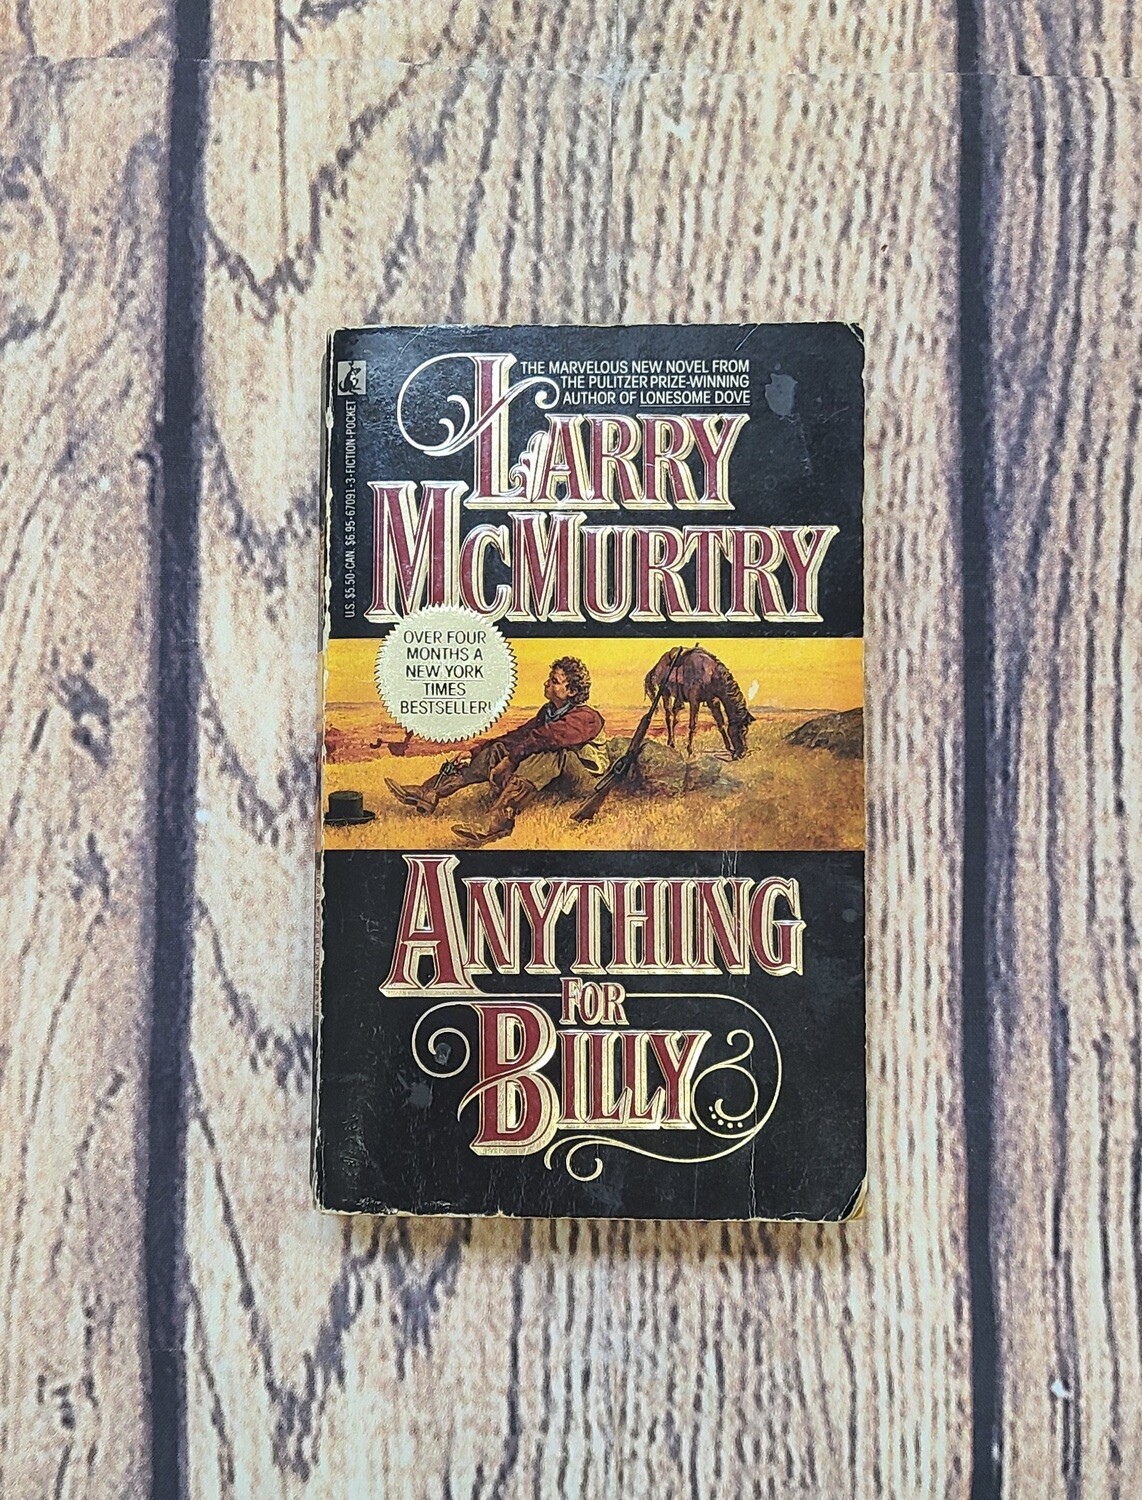 Anything for Billy by Larry McMurtry